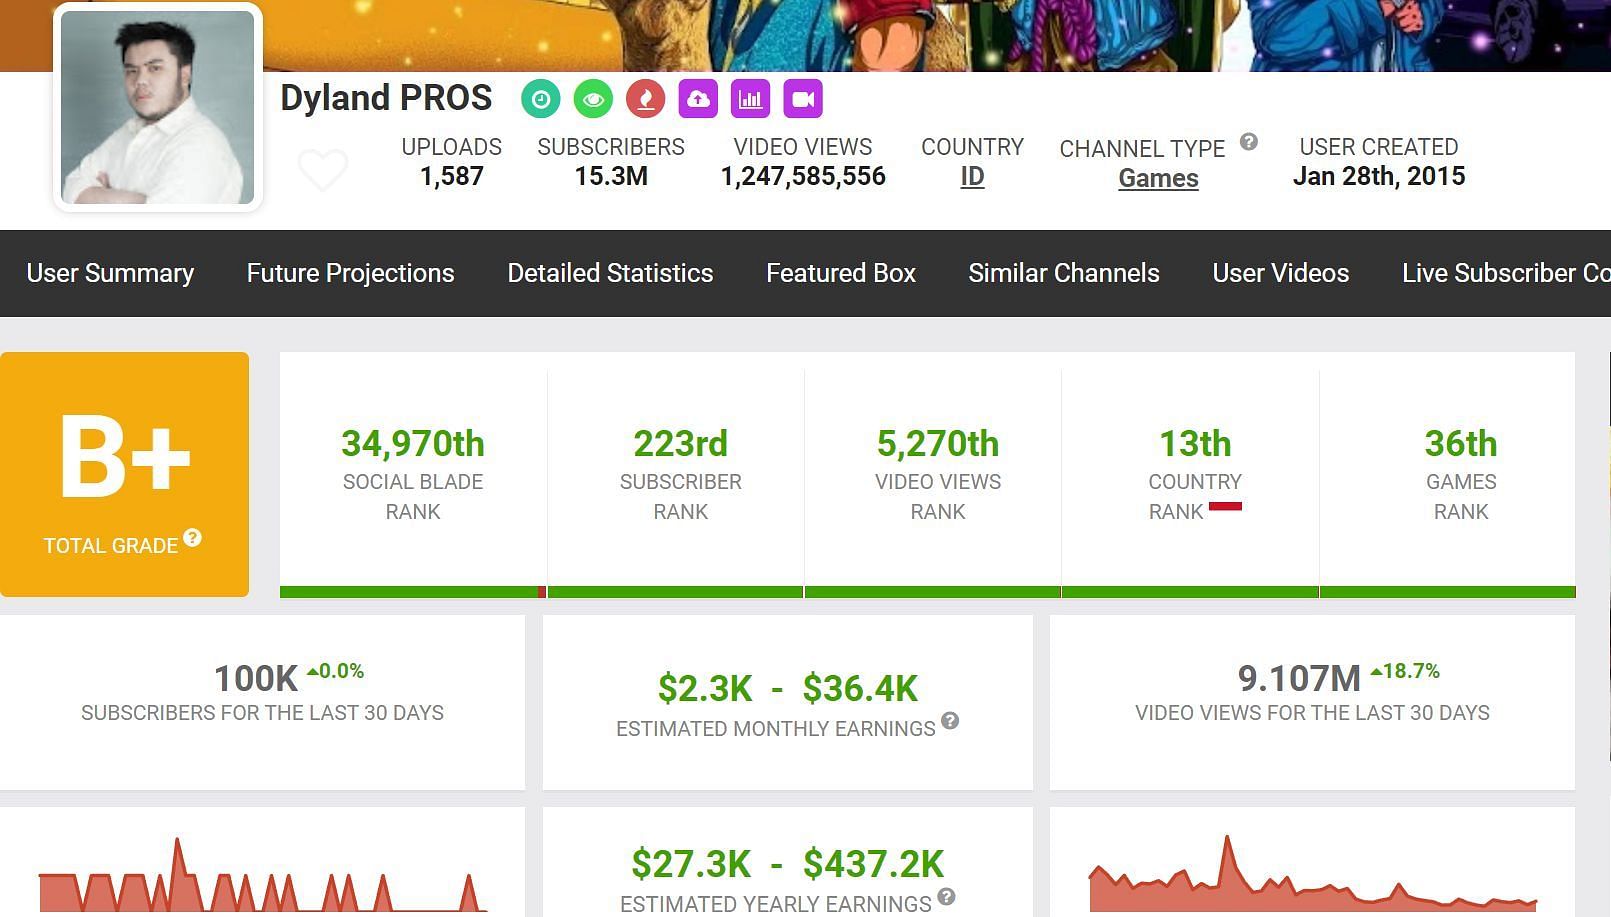 Earnings and more details of Dyland PROS on Social Blade (Image via Social Blade)